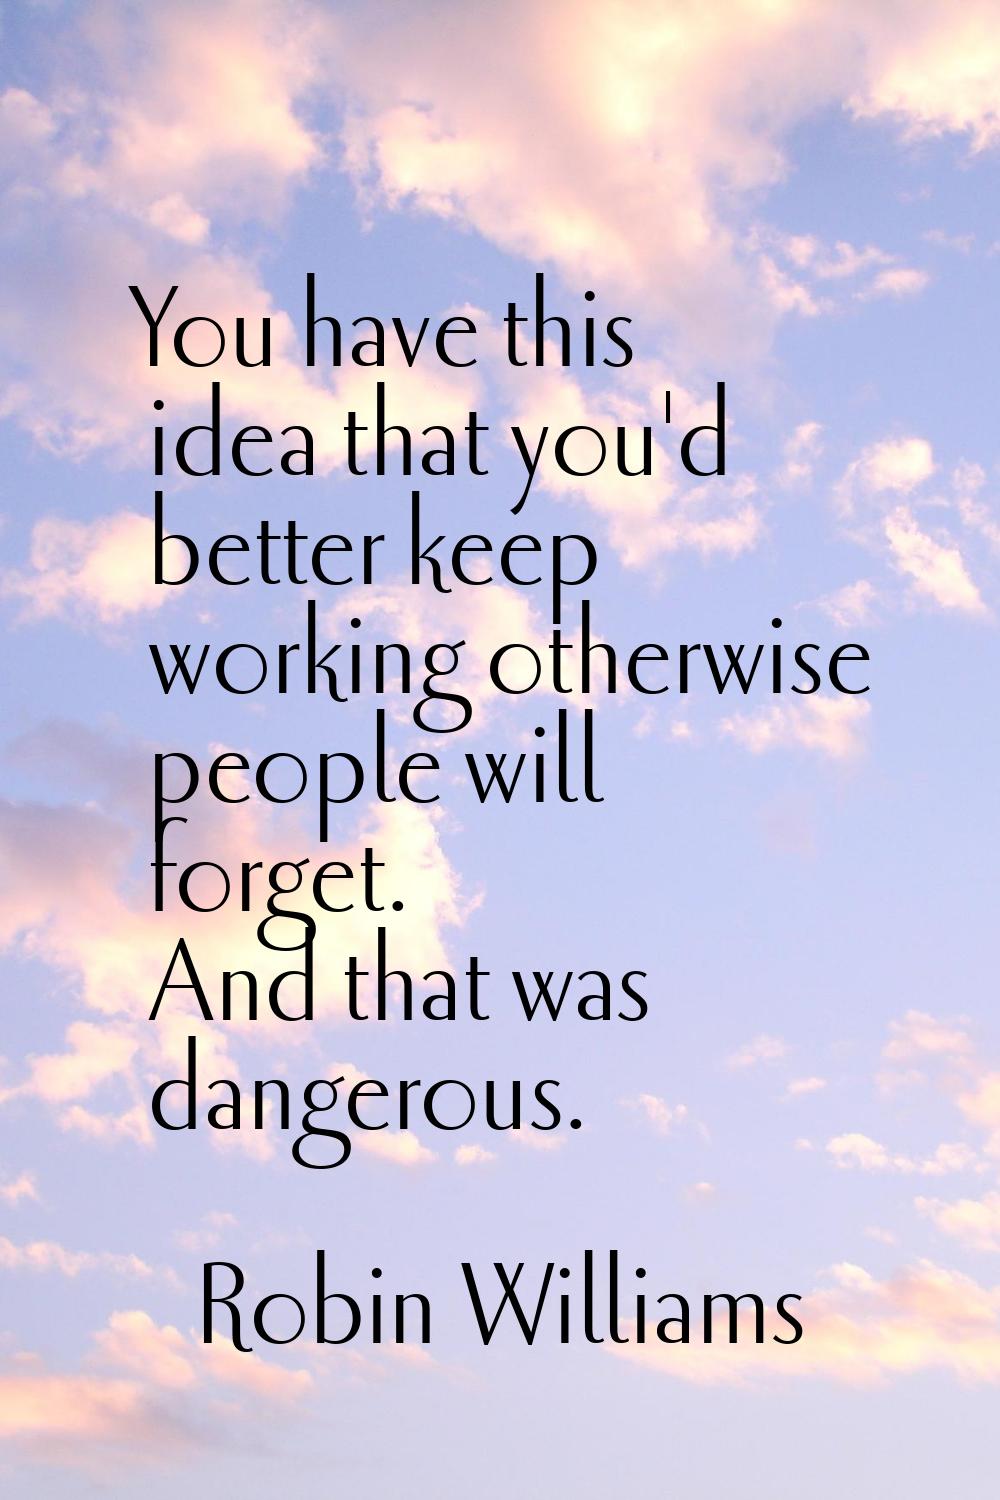 You have this idea that you'd better keep working otherwise people will forget. And that was danger